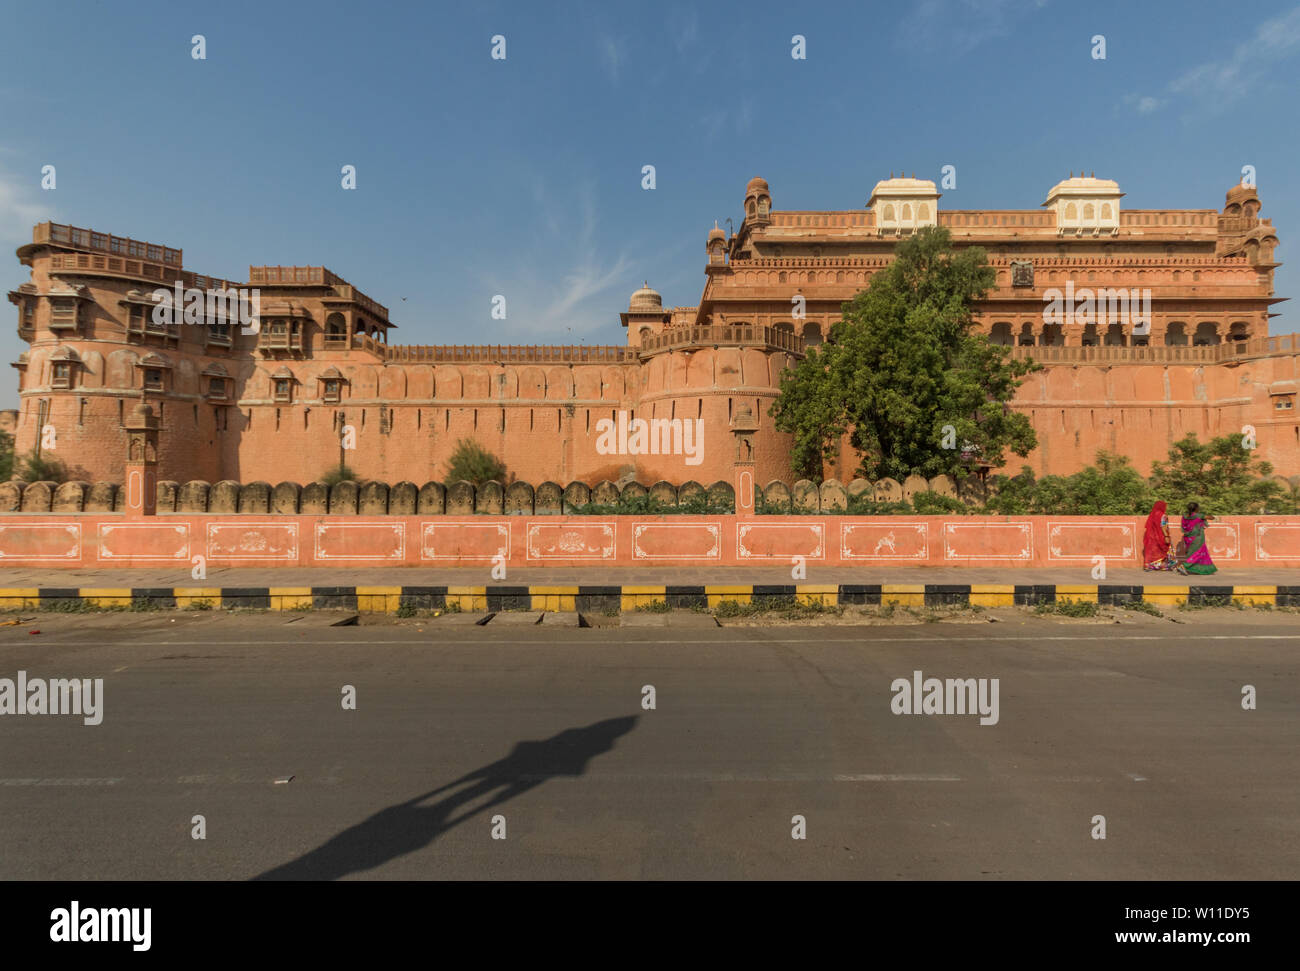 Bikaner, India - Rajasthan is famous for its fortresses and the desertic environment. Here in particular the city of Bikaner Stock Photo